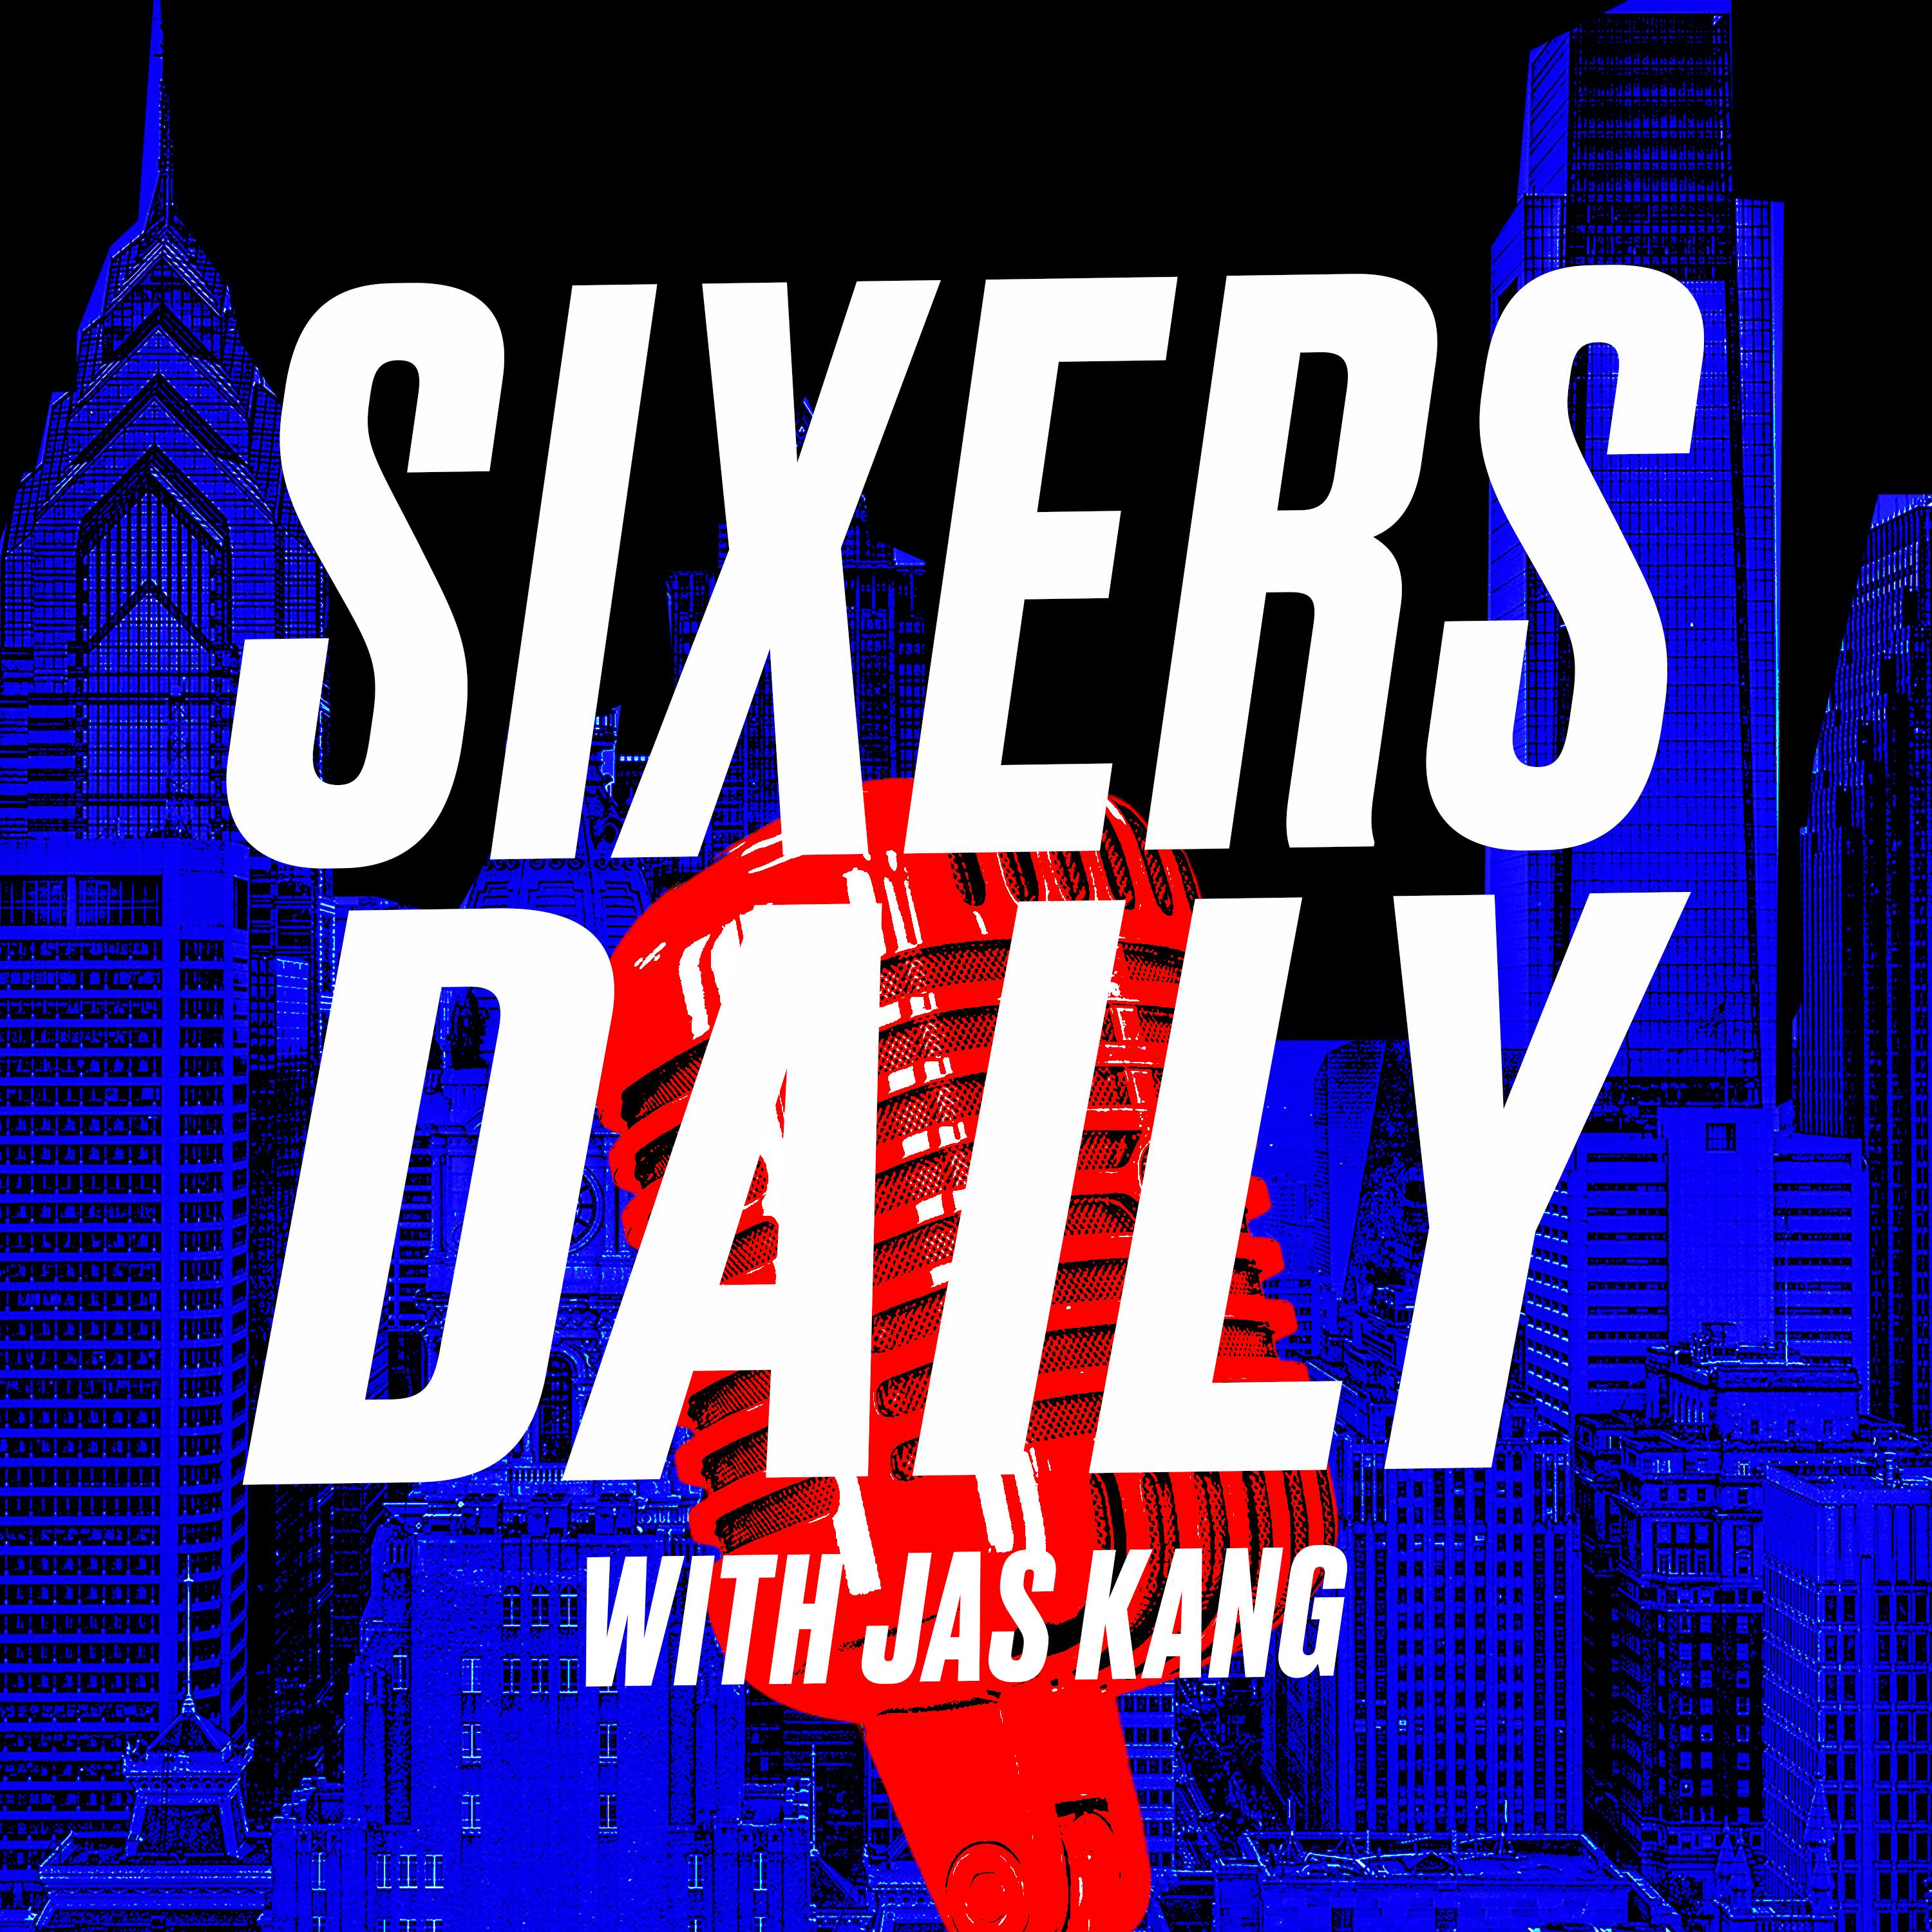 Sixers Daily with Jas Kang (Part 2) - Ohio State assistant coach Jake Diebler on 2022 NBA Draft prospect E.J. Liddell and his potential fit in Philly